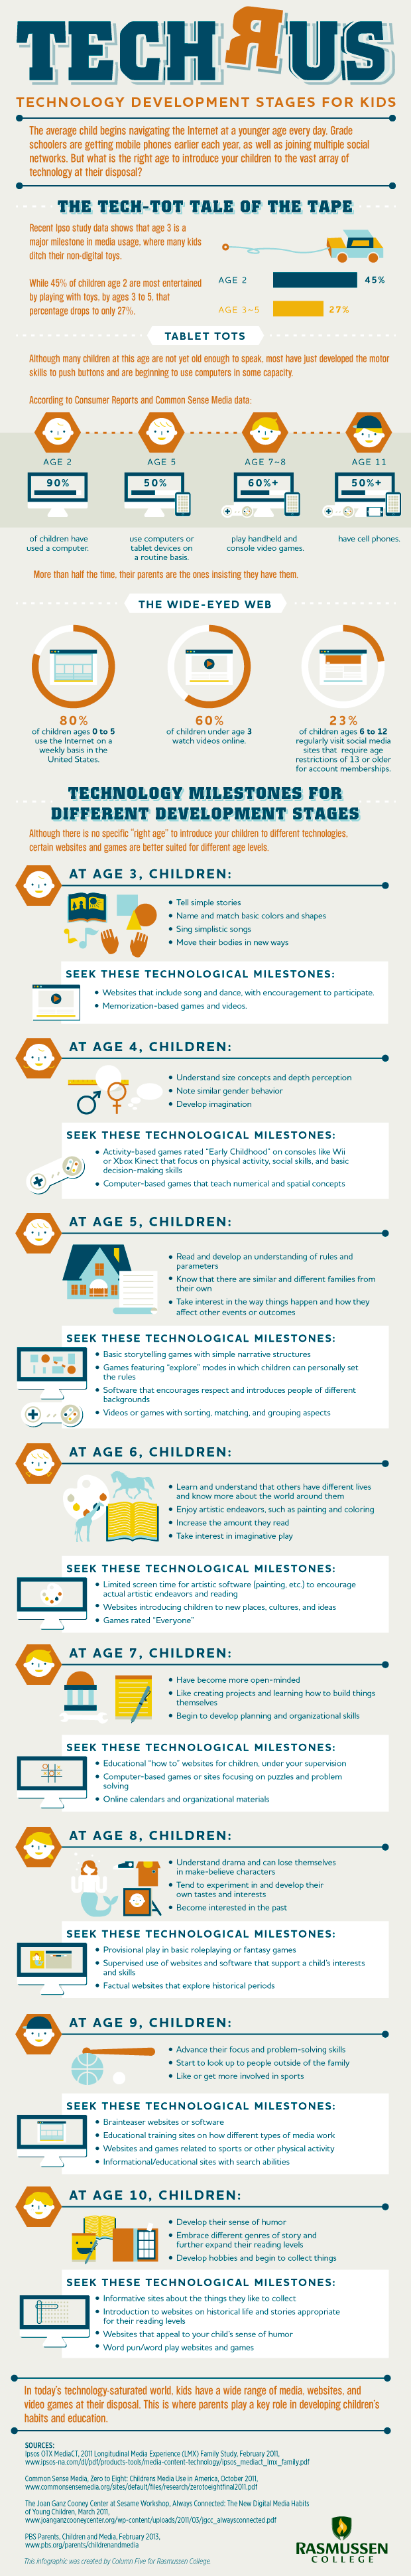 Educational-Technology-Development-Stages-for-Kids-Infographic